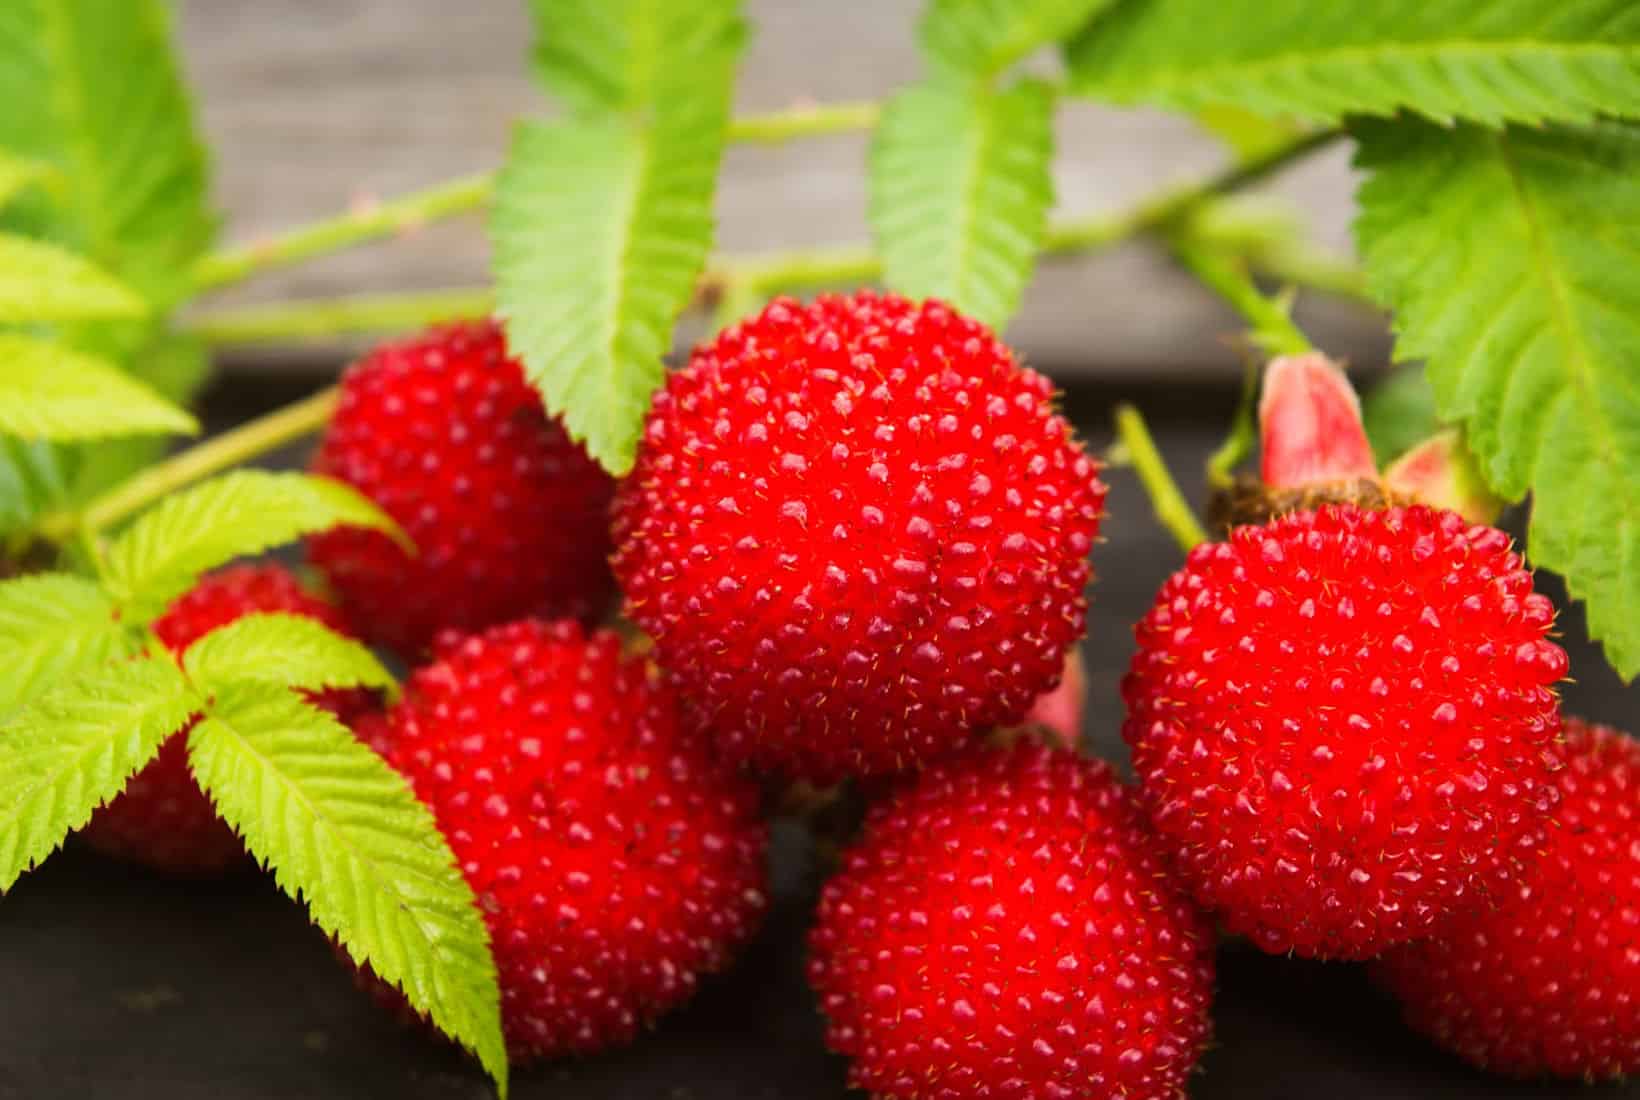 Thimbleberries image from shutterstock